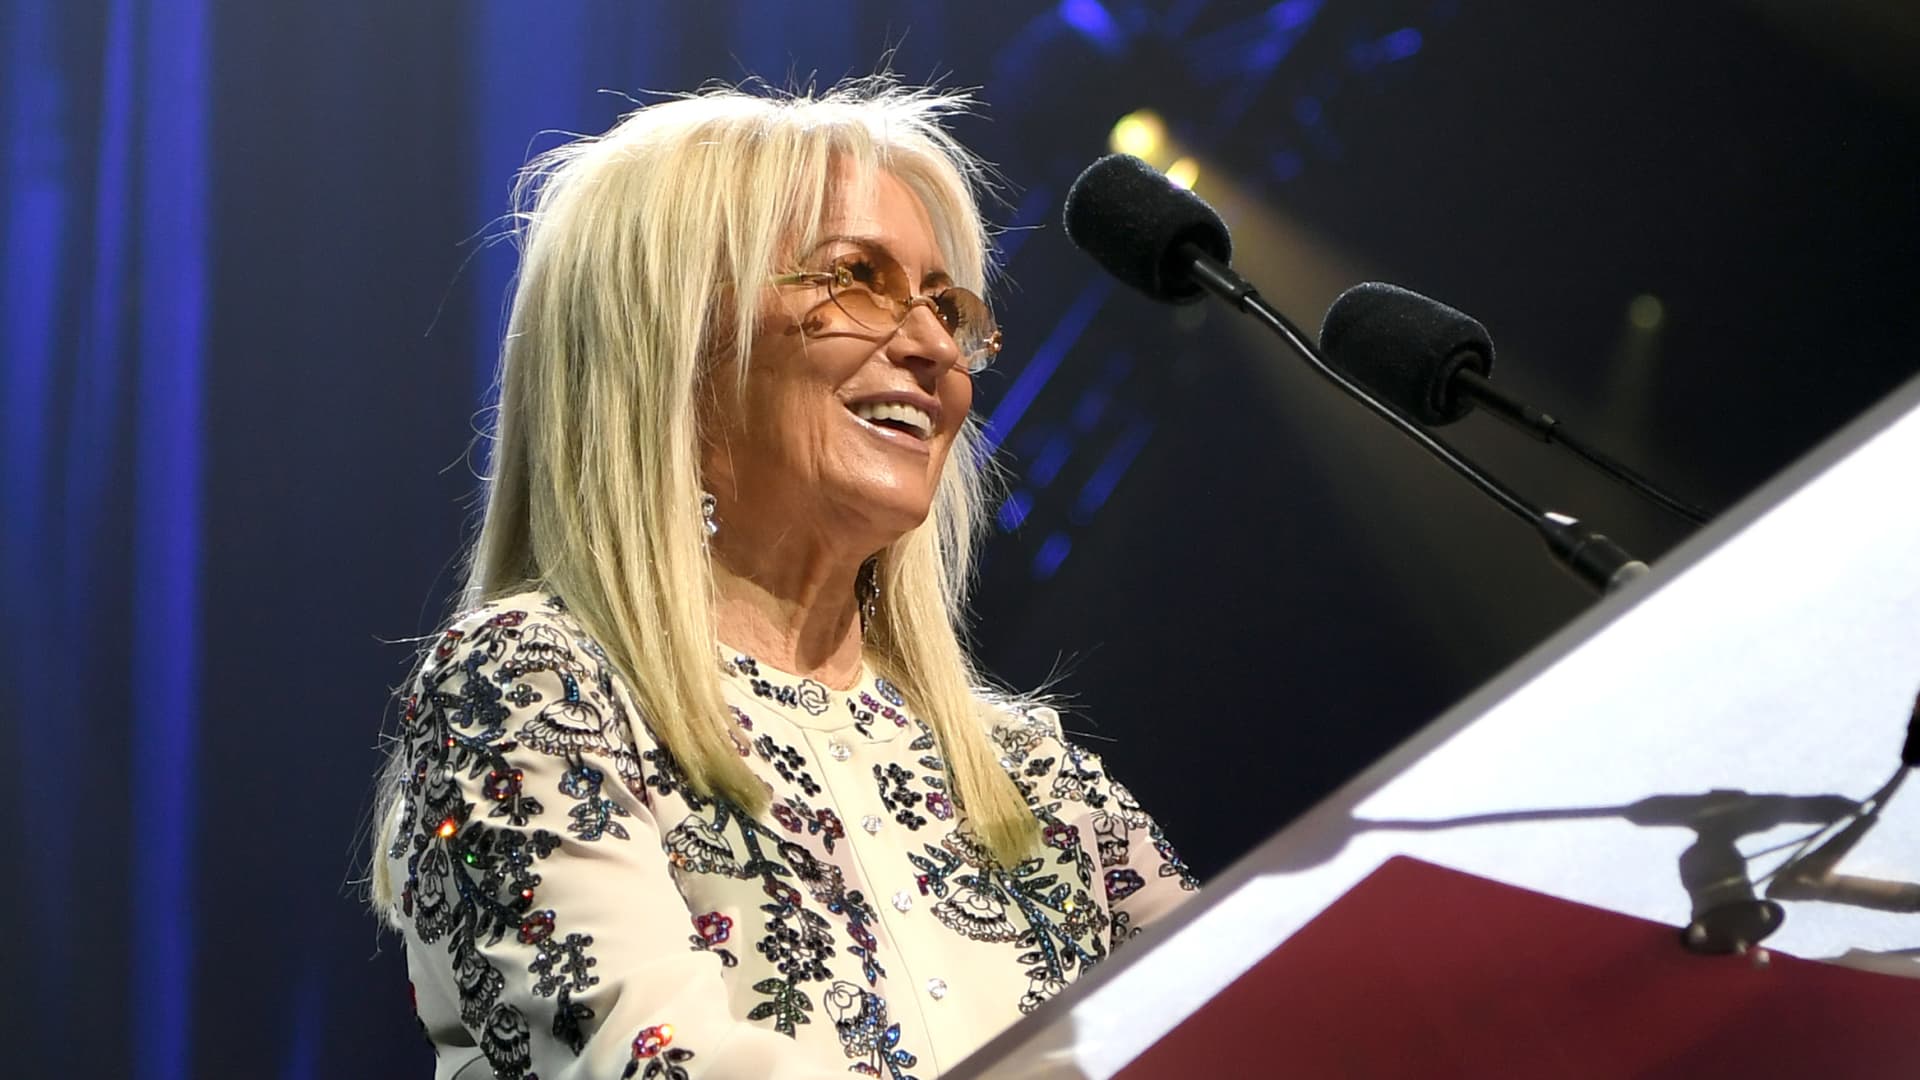 Miriam Adelson speaks onstage during the 24th annual Keep Memory Alive benefit for the Cleveland Clinic Lou Ruvo Center for Brain Health at MGM Grand Garden Arena on March 7, 2020, in Las Vegas, Nevada. (Photo by Denise Truscello/Getty Images for Keep Memory Alive)